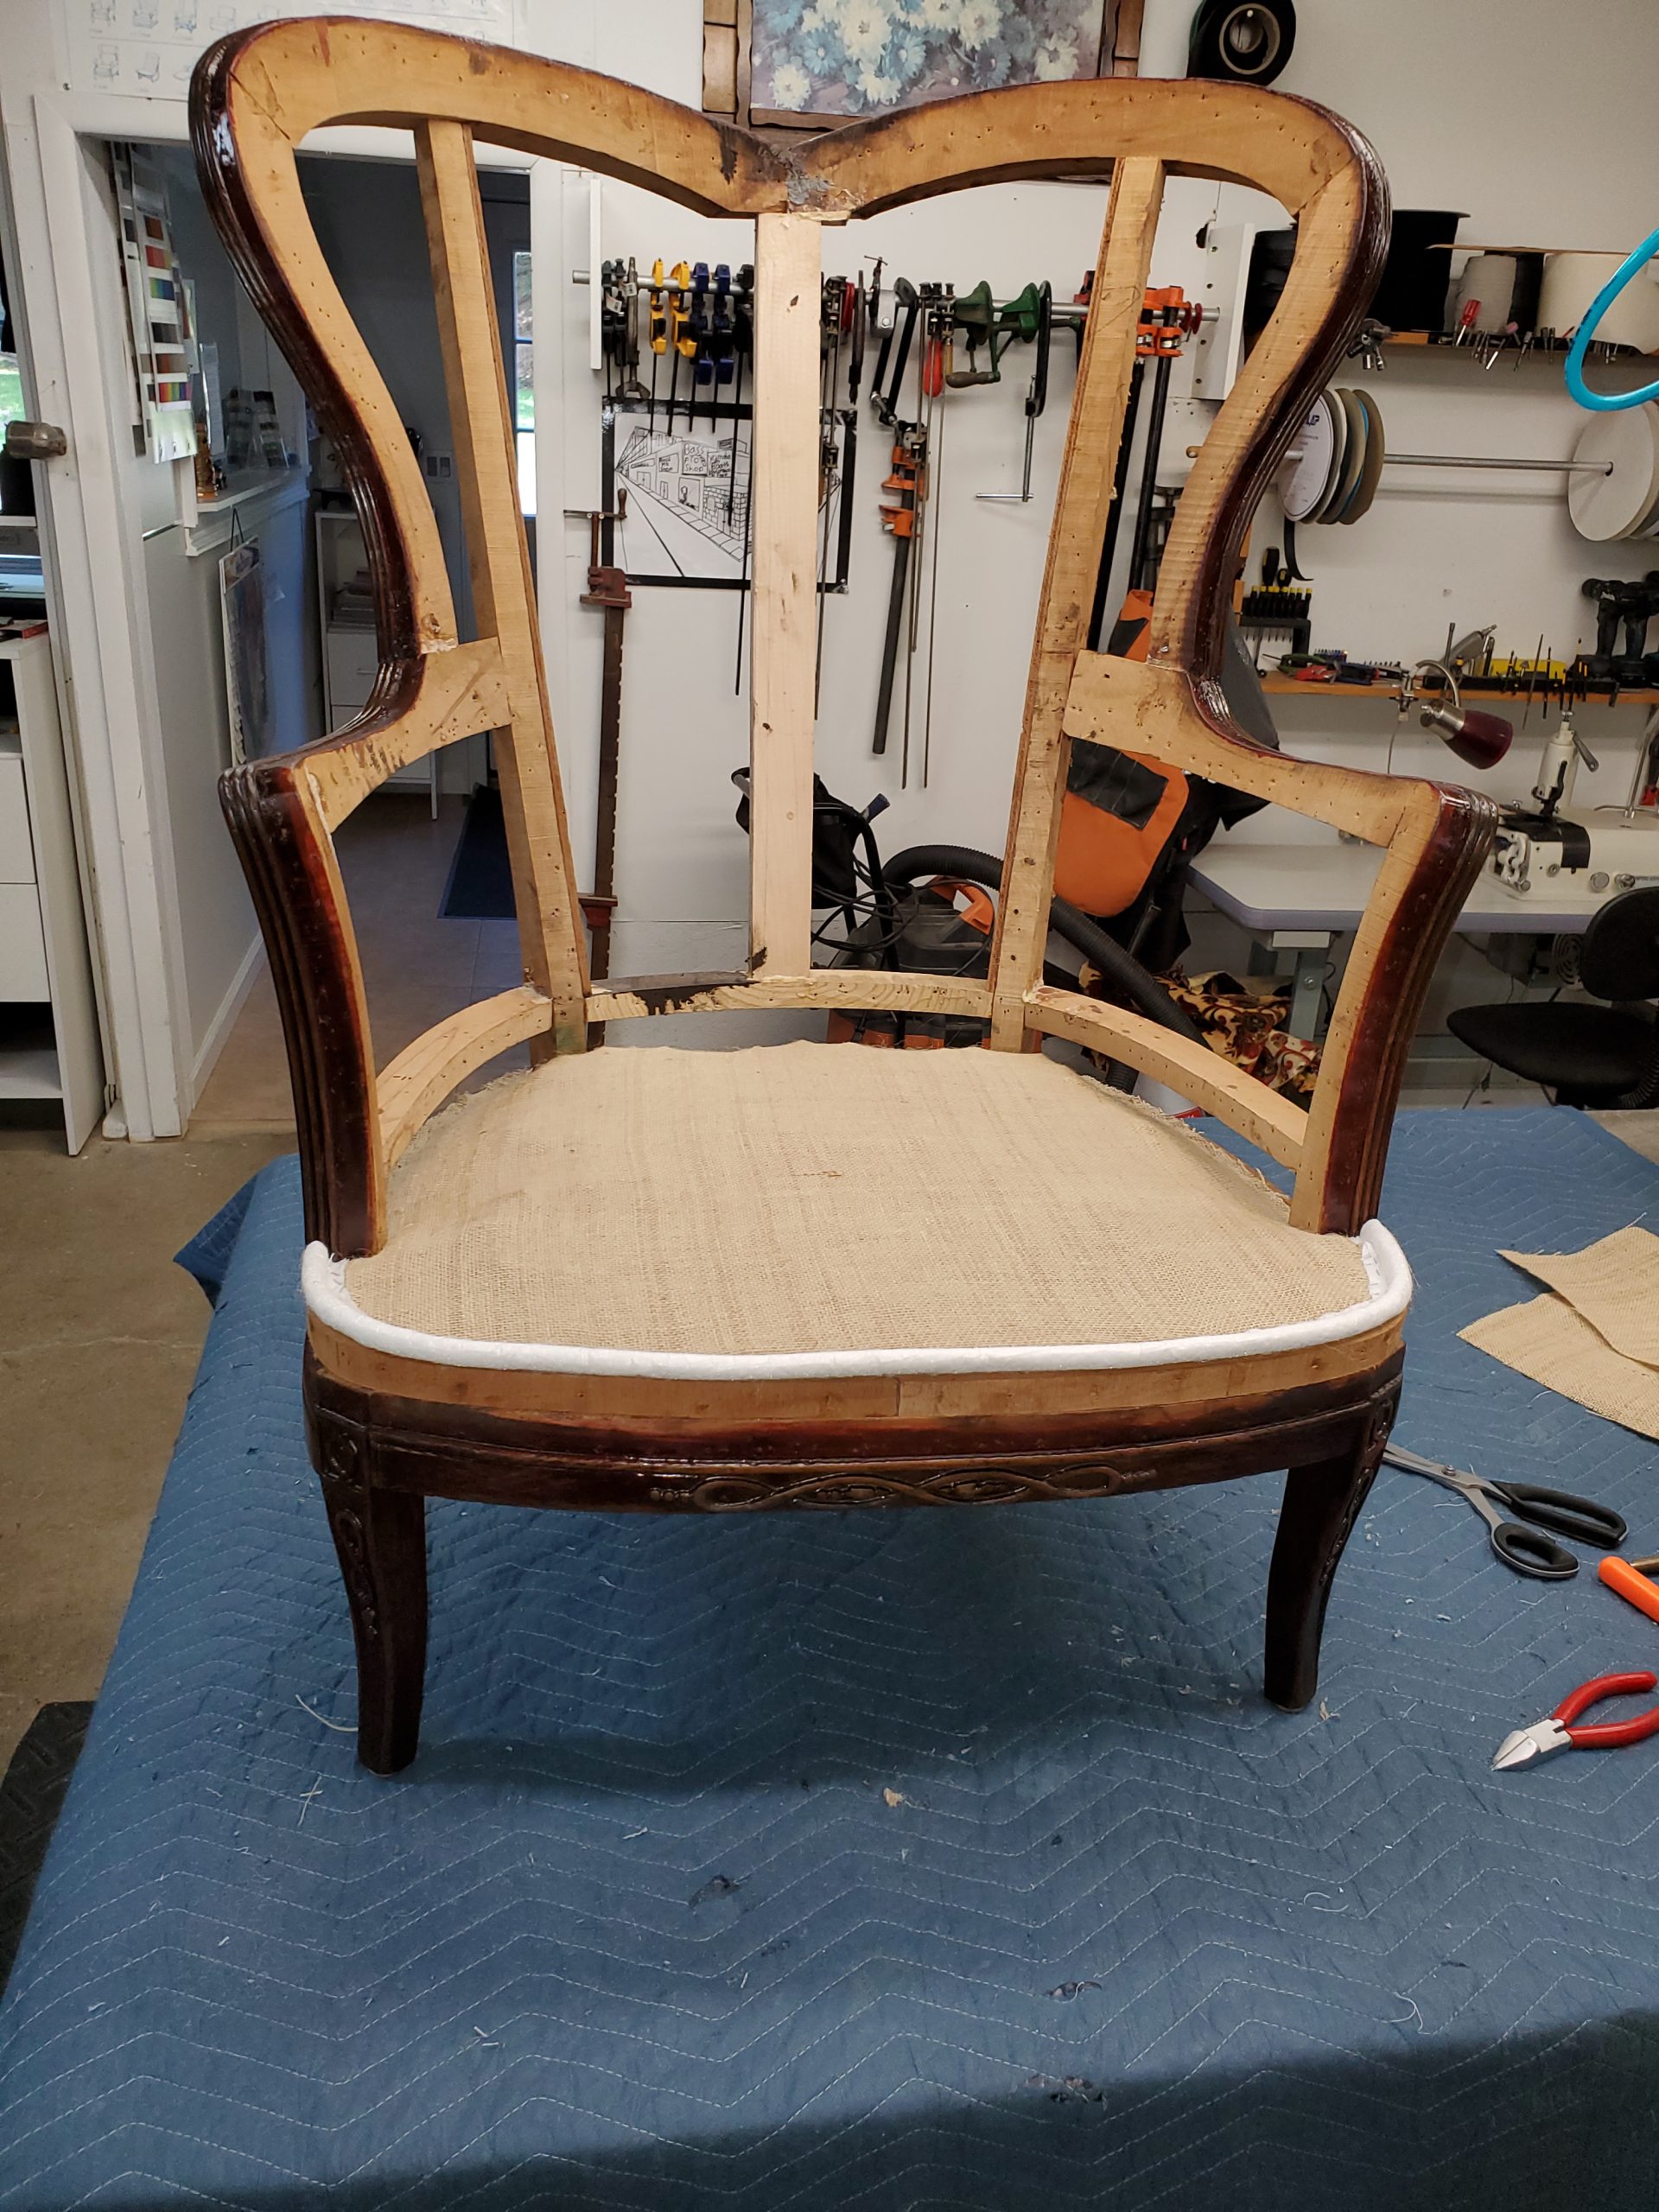 How much does it cost to Reupholster a Chair?